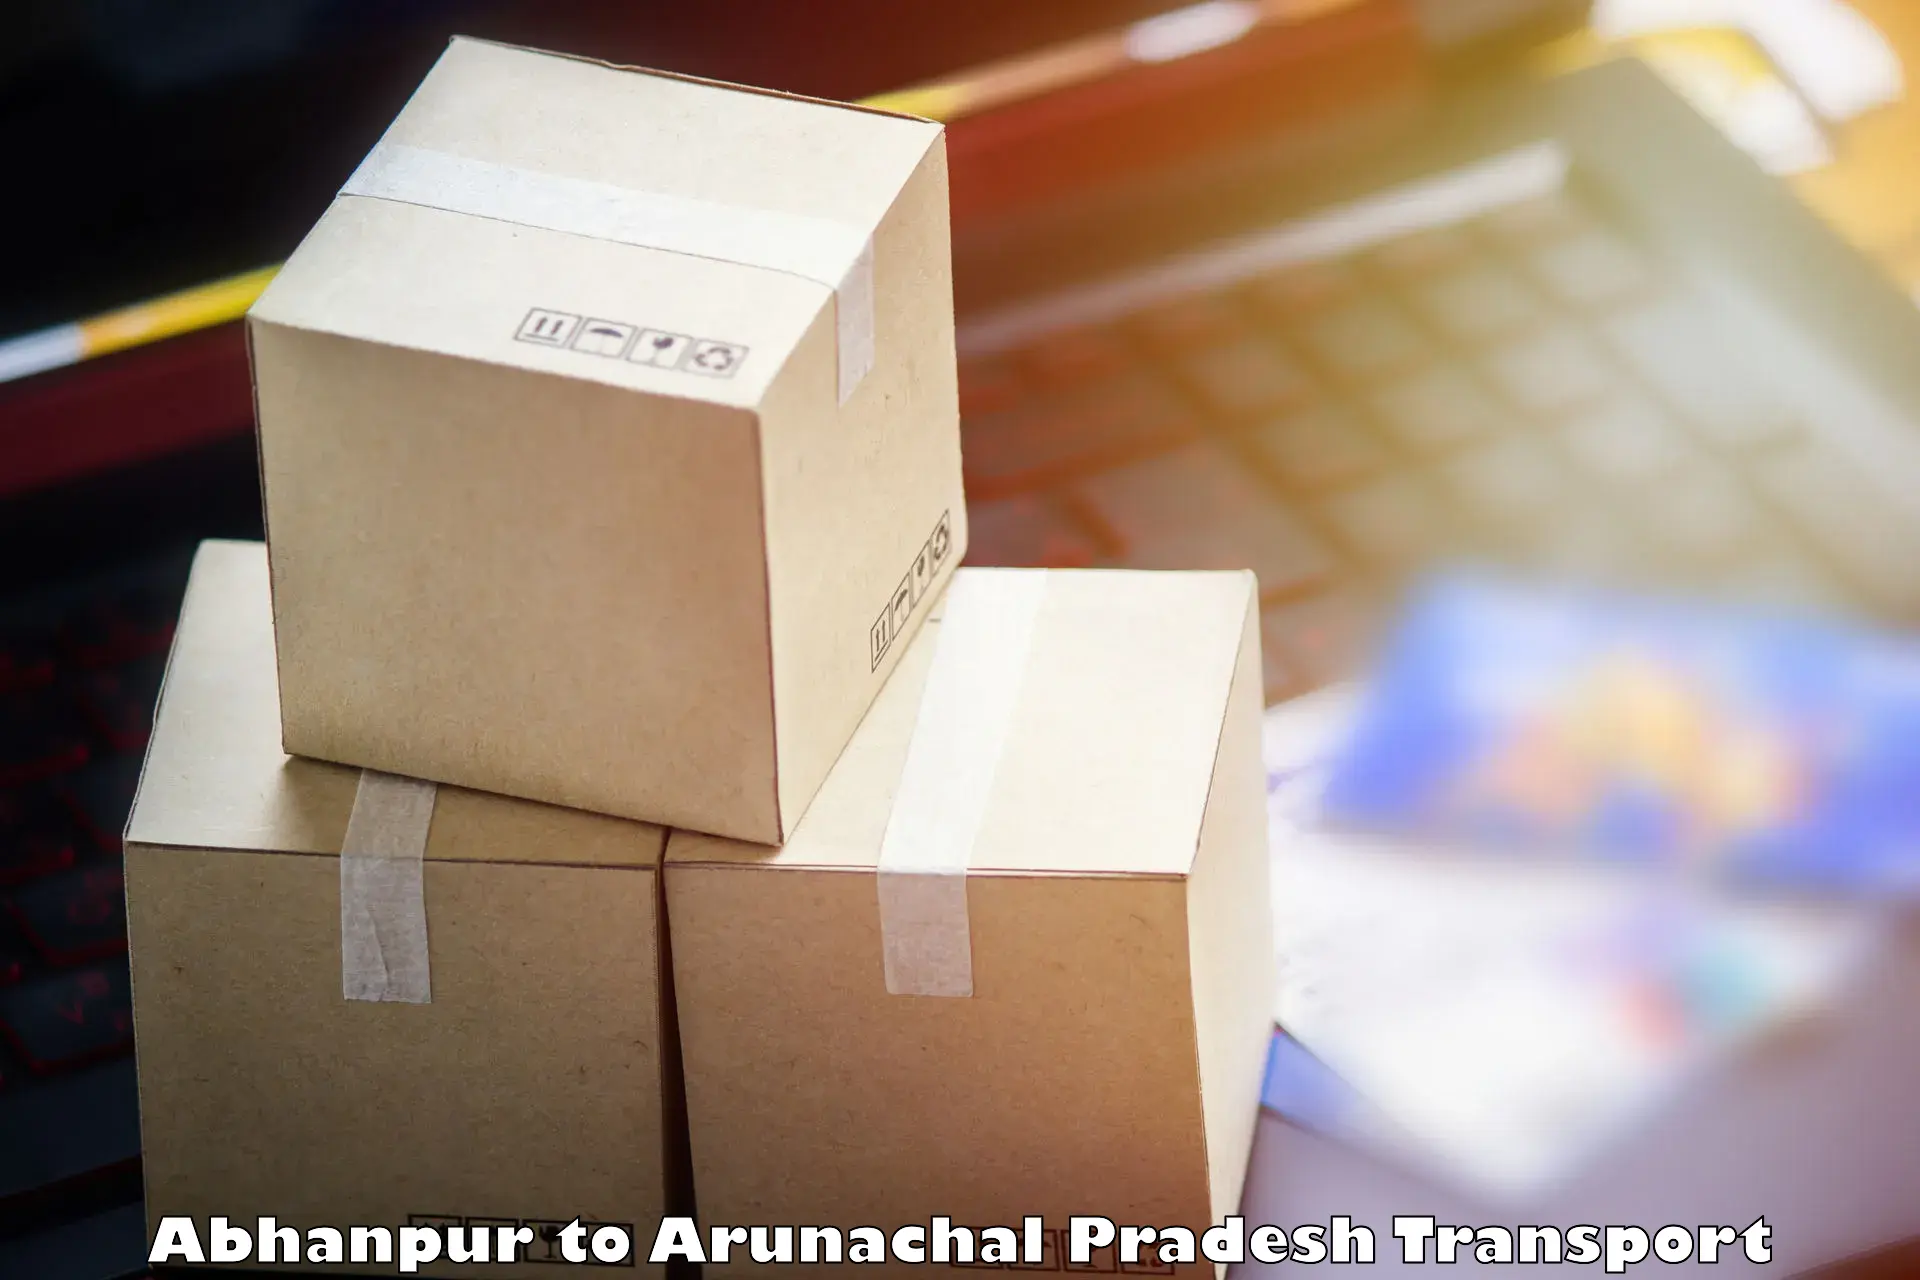 Vehicle transport services in Abhanpur to Deomali